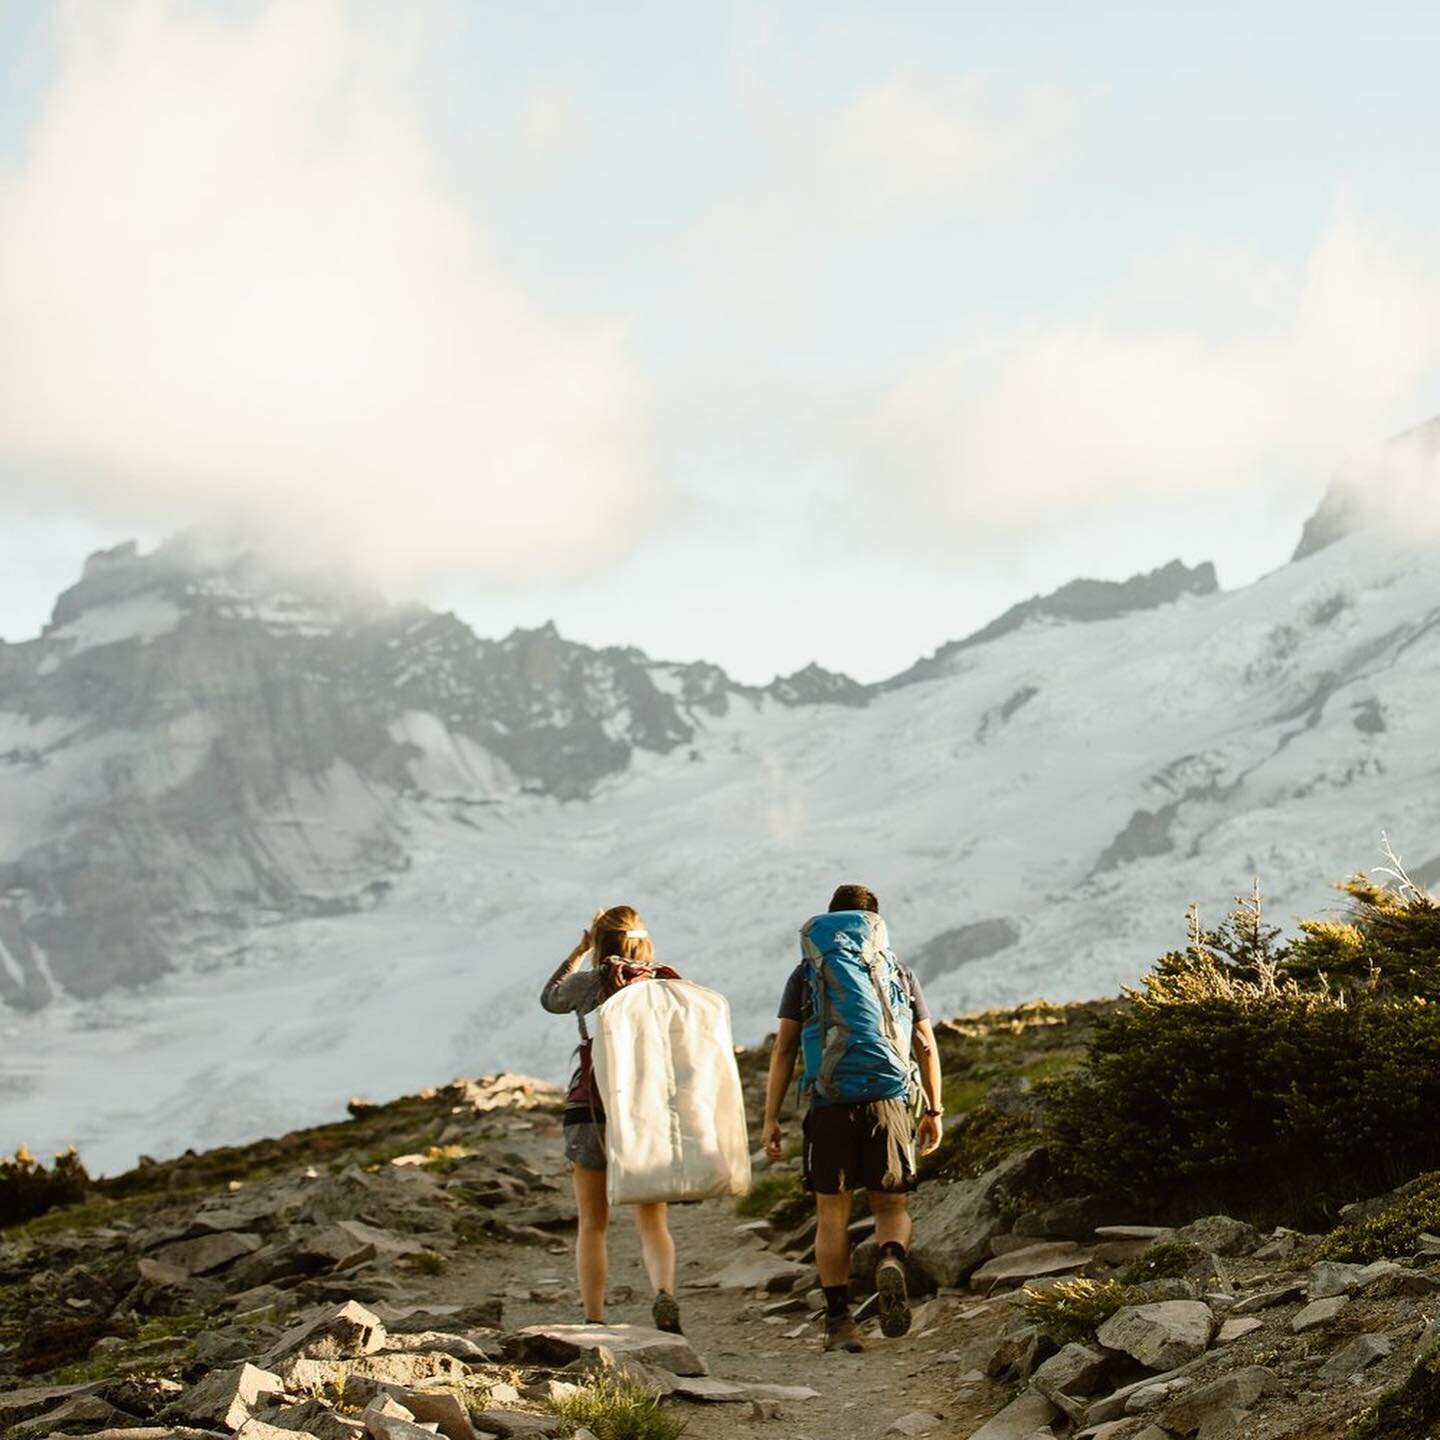 ✨ NEW BLOG POST ✨

Eloping gives you the power to choose how you get married, and to make sure your day is about doing what feels right to you. If you&rsquo;re an adventurous couple, hiking to the top of a mountain to say your vows, feeling the crisp